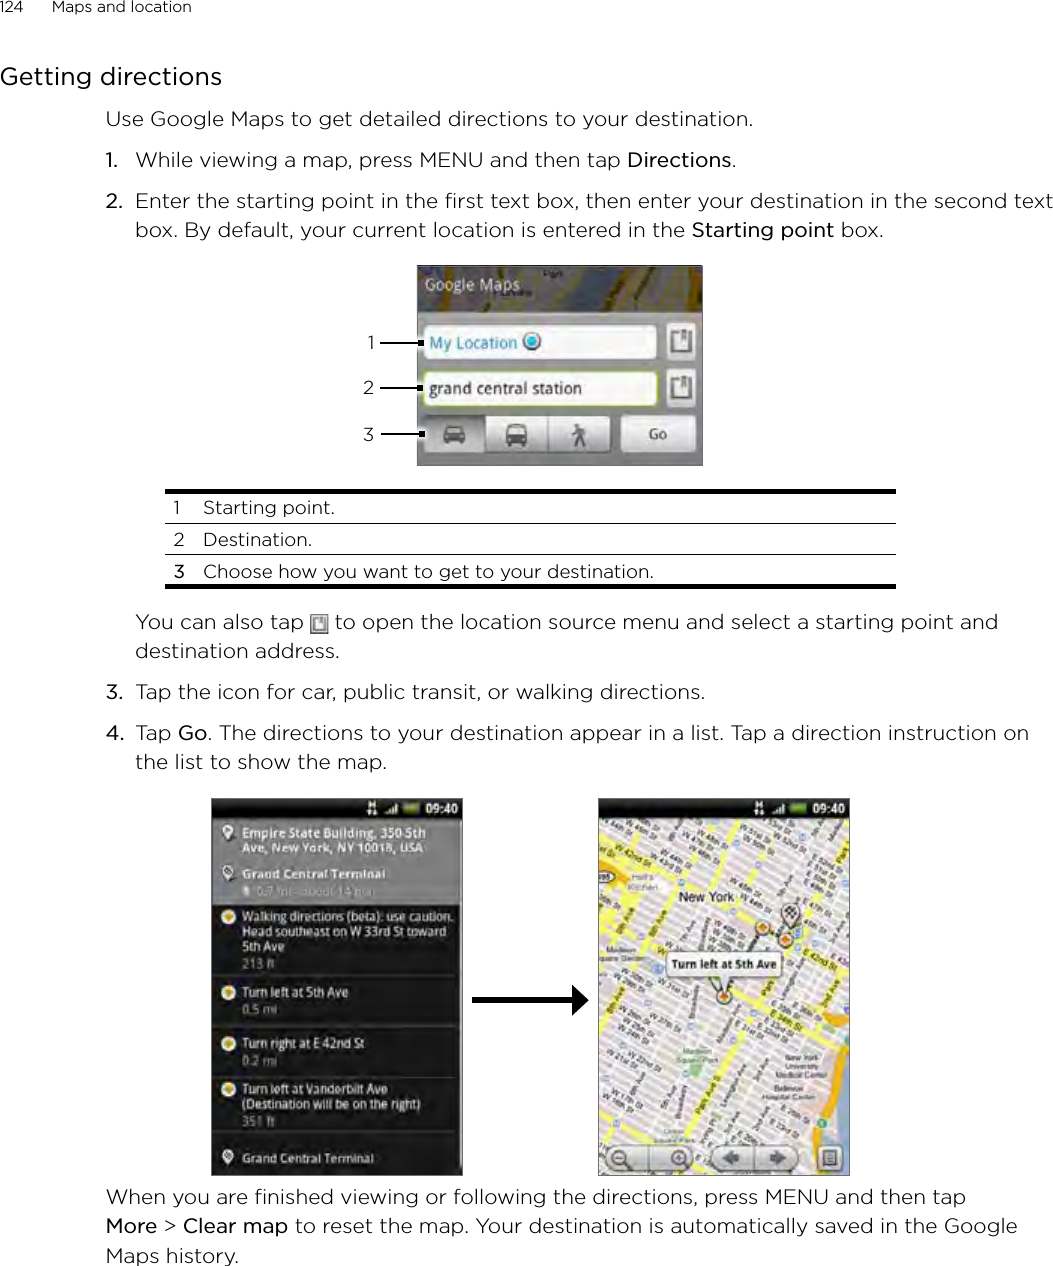 124      Maps and location      Getting directionsUse Google Maps to get detailed directions to your destination.While viewing a map, press MENU and then tap Directions.Enter the starting point in the first text box, then enter your destination in the second text box. By default, your current location is entered in the Starting point box.3121  Starting point. 2  Destination.3  Choose how you want to get to your destination.You can also tap   to open the location source menu and select a starting point and destination address.3.  Tap the icon for car, public transit, or walking directions.4.  Tap Go. The directions to your destination appear in a list. Tap a direction instruction on the list to show the map. When you are finished viewing or following the directions, press MENU and then tap More &gt; Clear map to reset the map. Your destination is automatically saved in the Google Maps history.1.2.